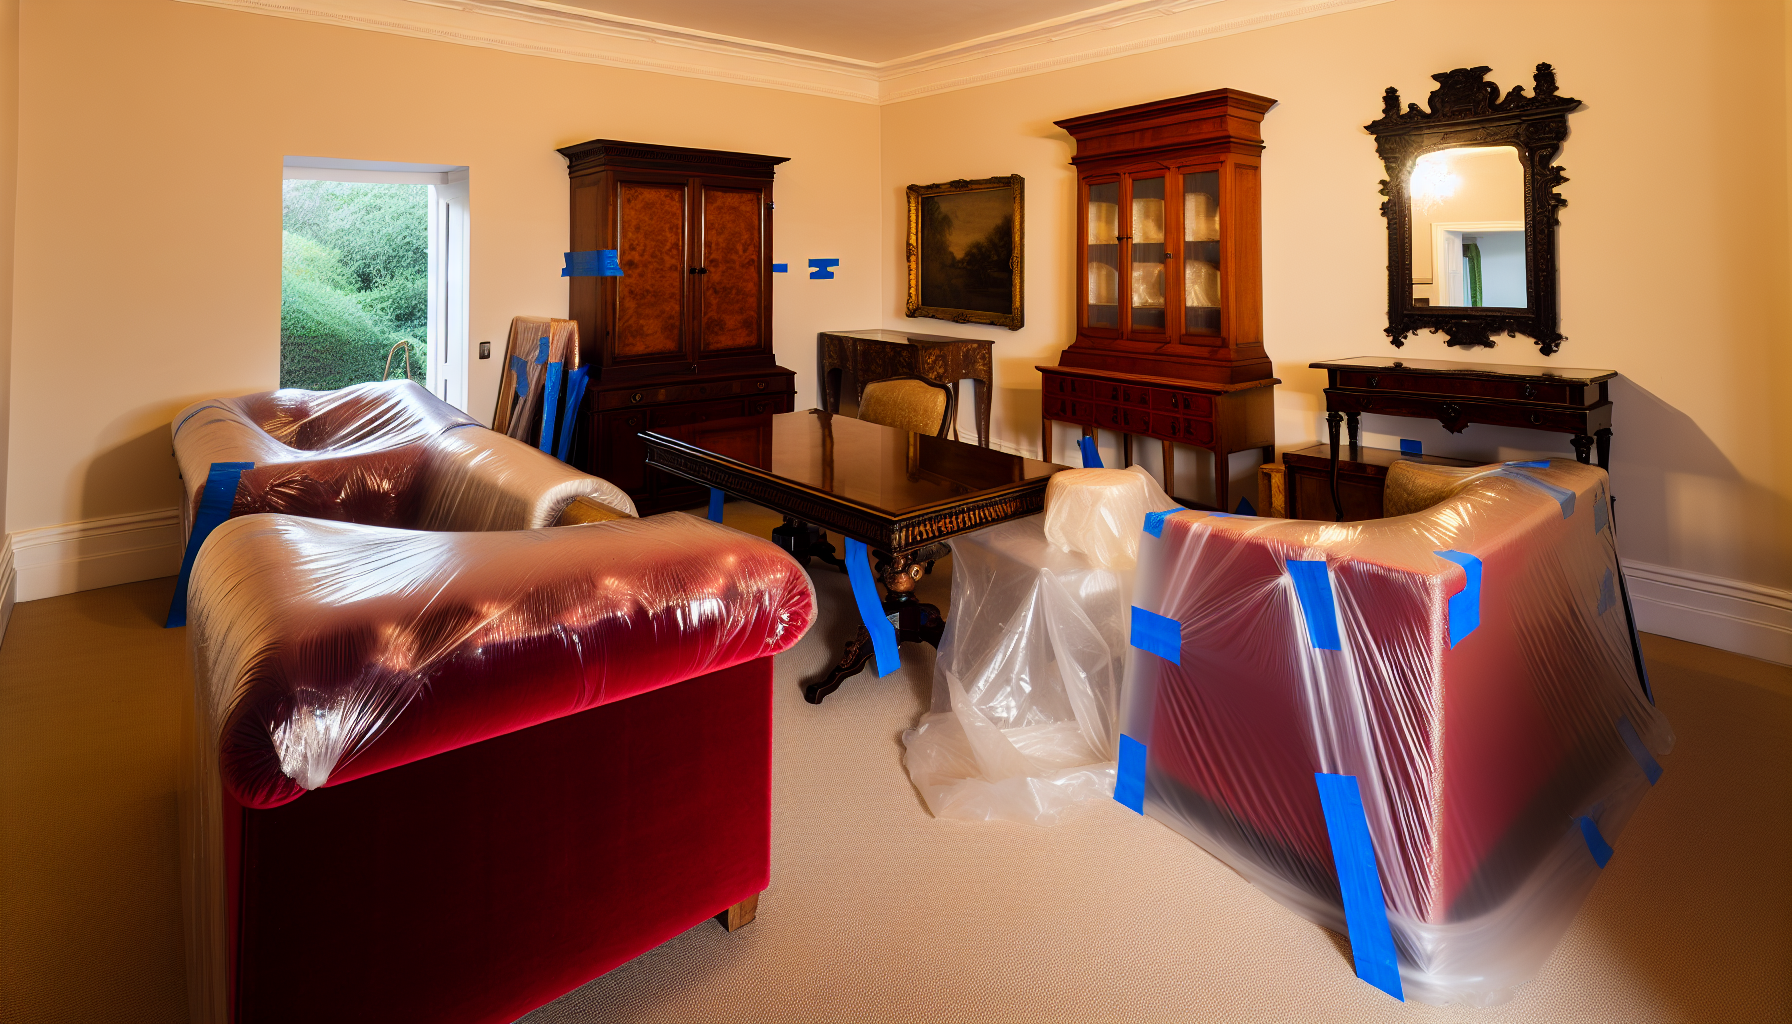 Furniture covered with plastic sheeting to protect from water damage